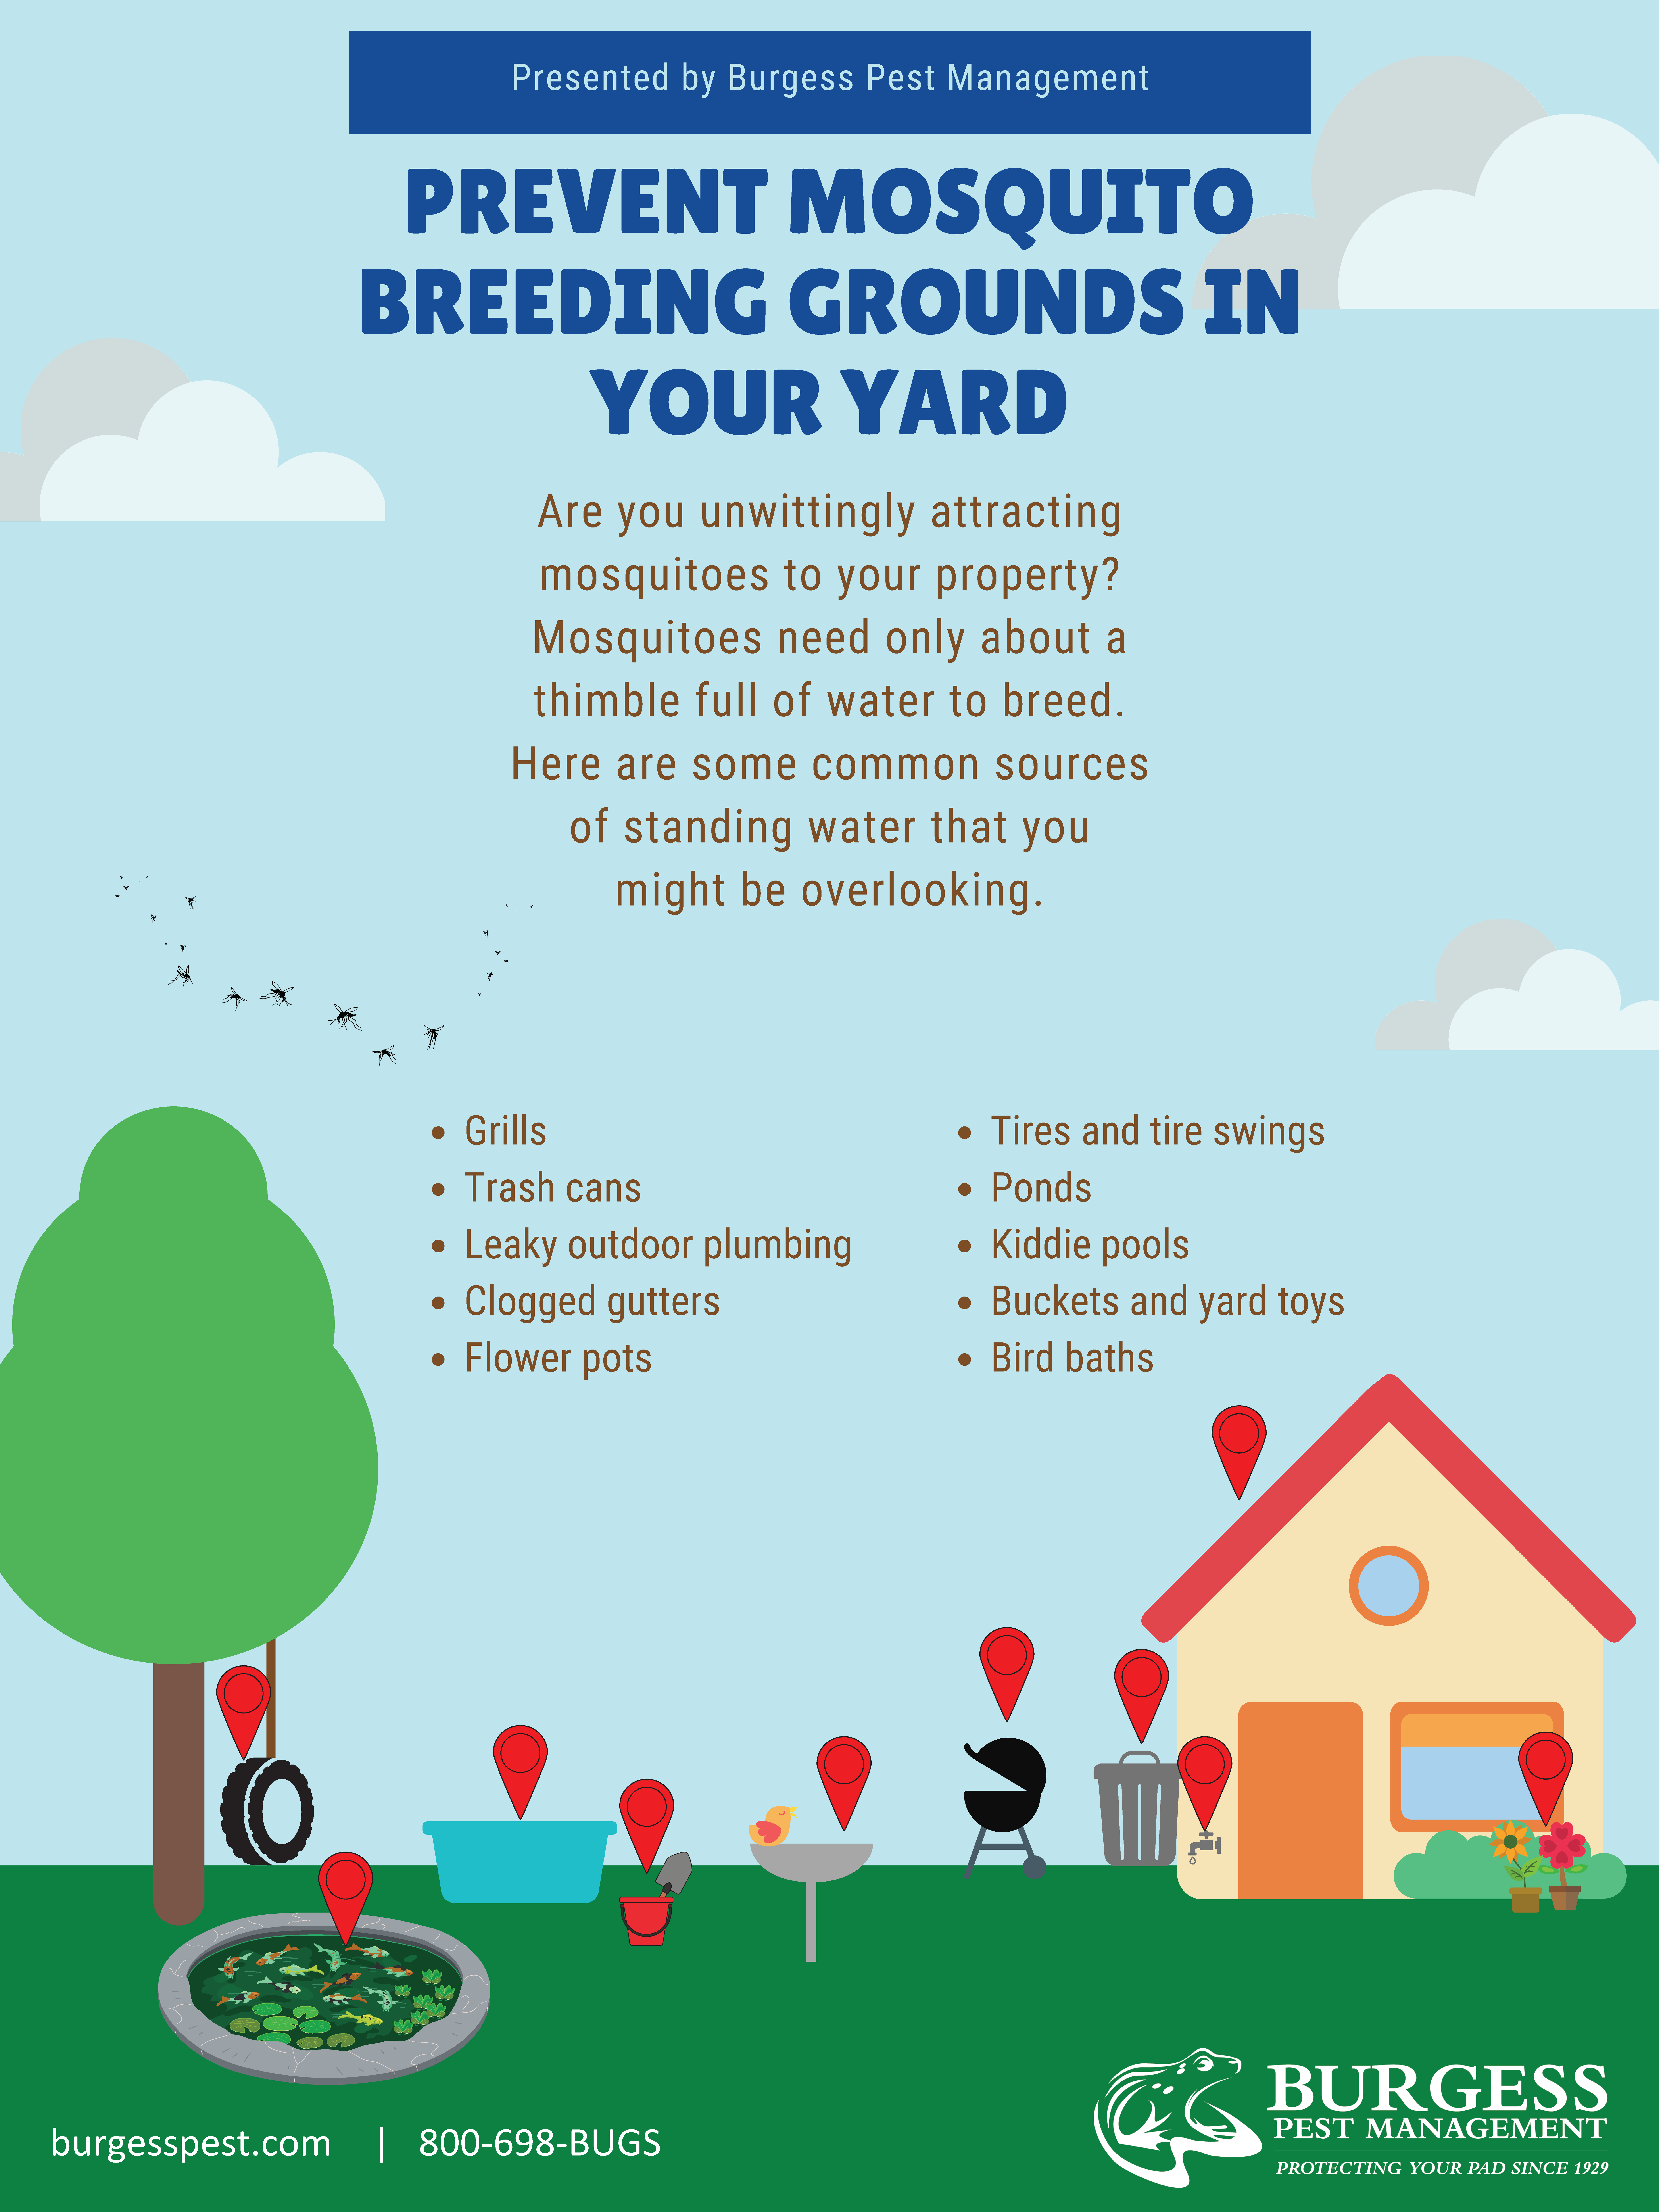 Prevent Mosquito Breeding Grounds in Your Yard [INFOGRAPHIC]